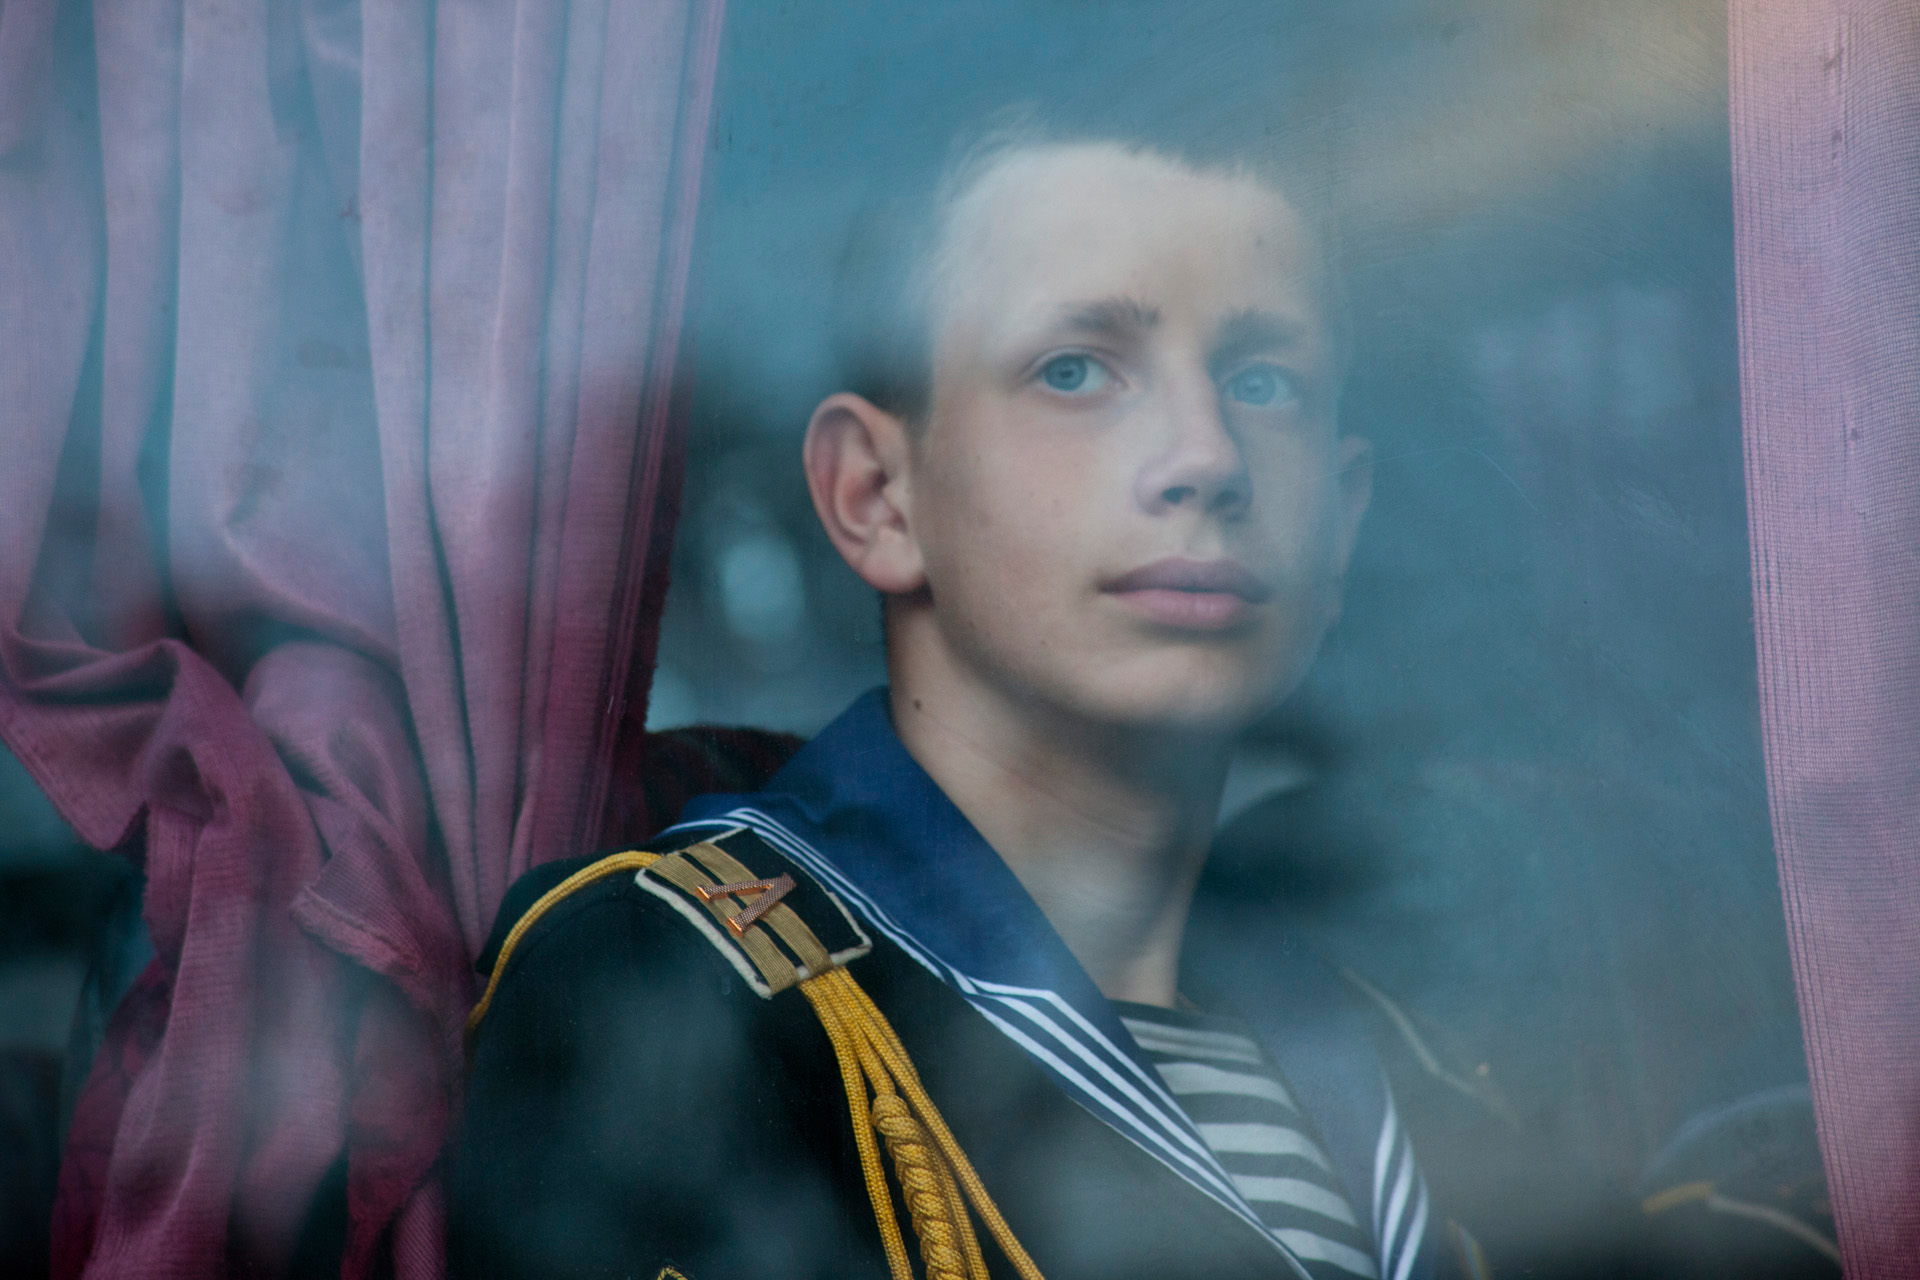  Yuri Perov, a Ukrainian naval cadet, takes the bus to his barracks after rehearsal for the Victory Day parade. To remember the sacrifice of fallen soldiers is viewed as a holy duty in Sevastopol, which endured a 247-day-long siege by Hitler's army i